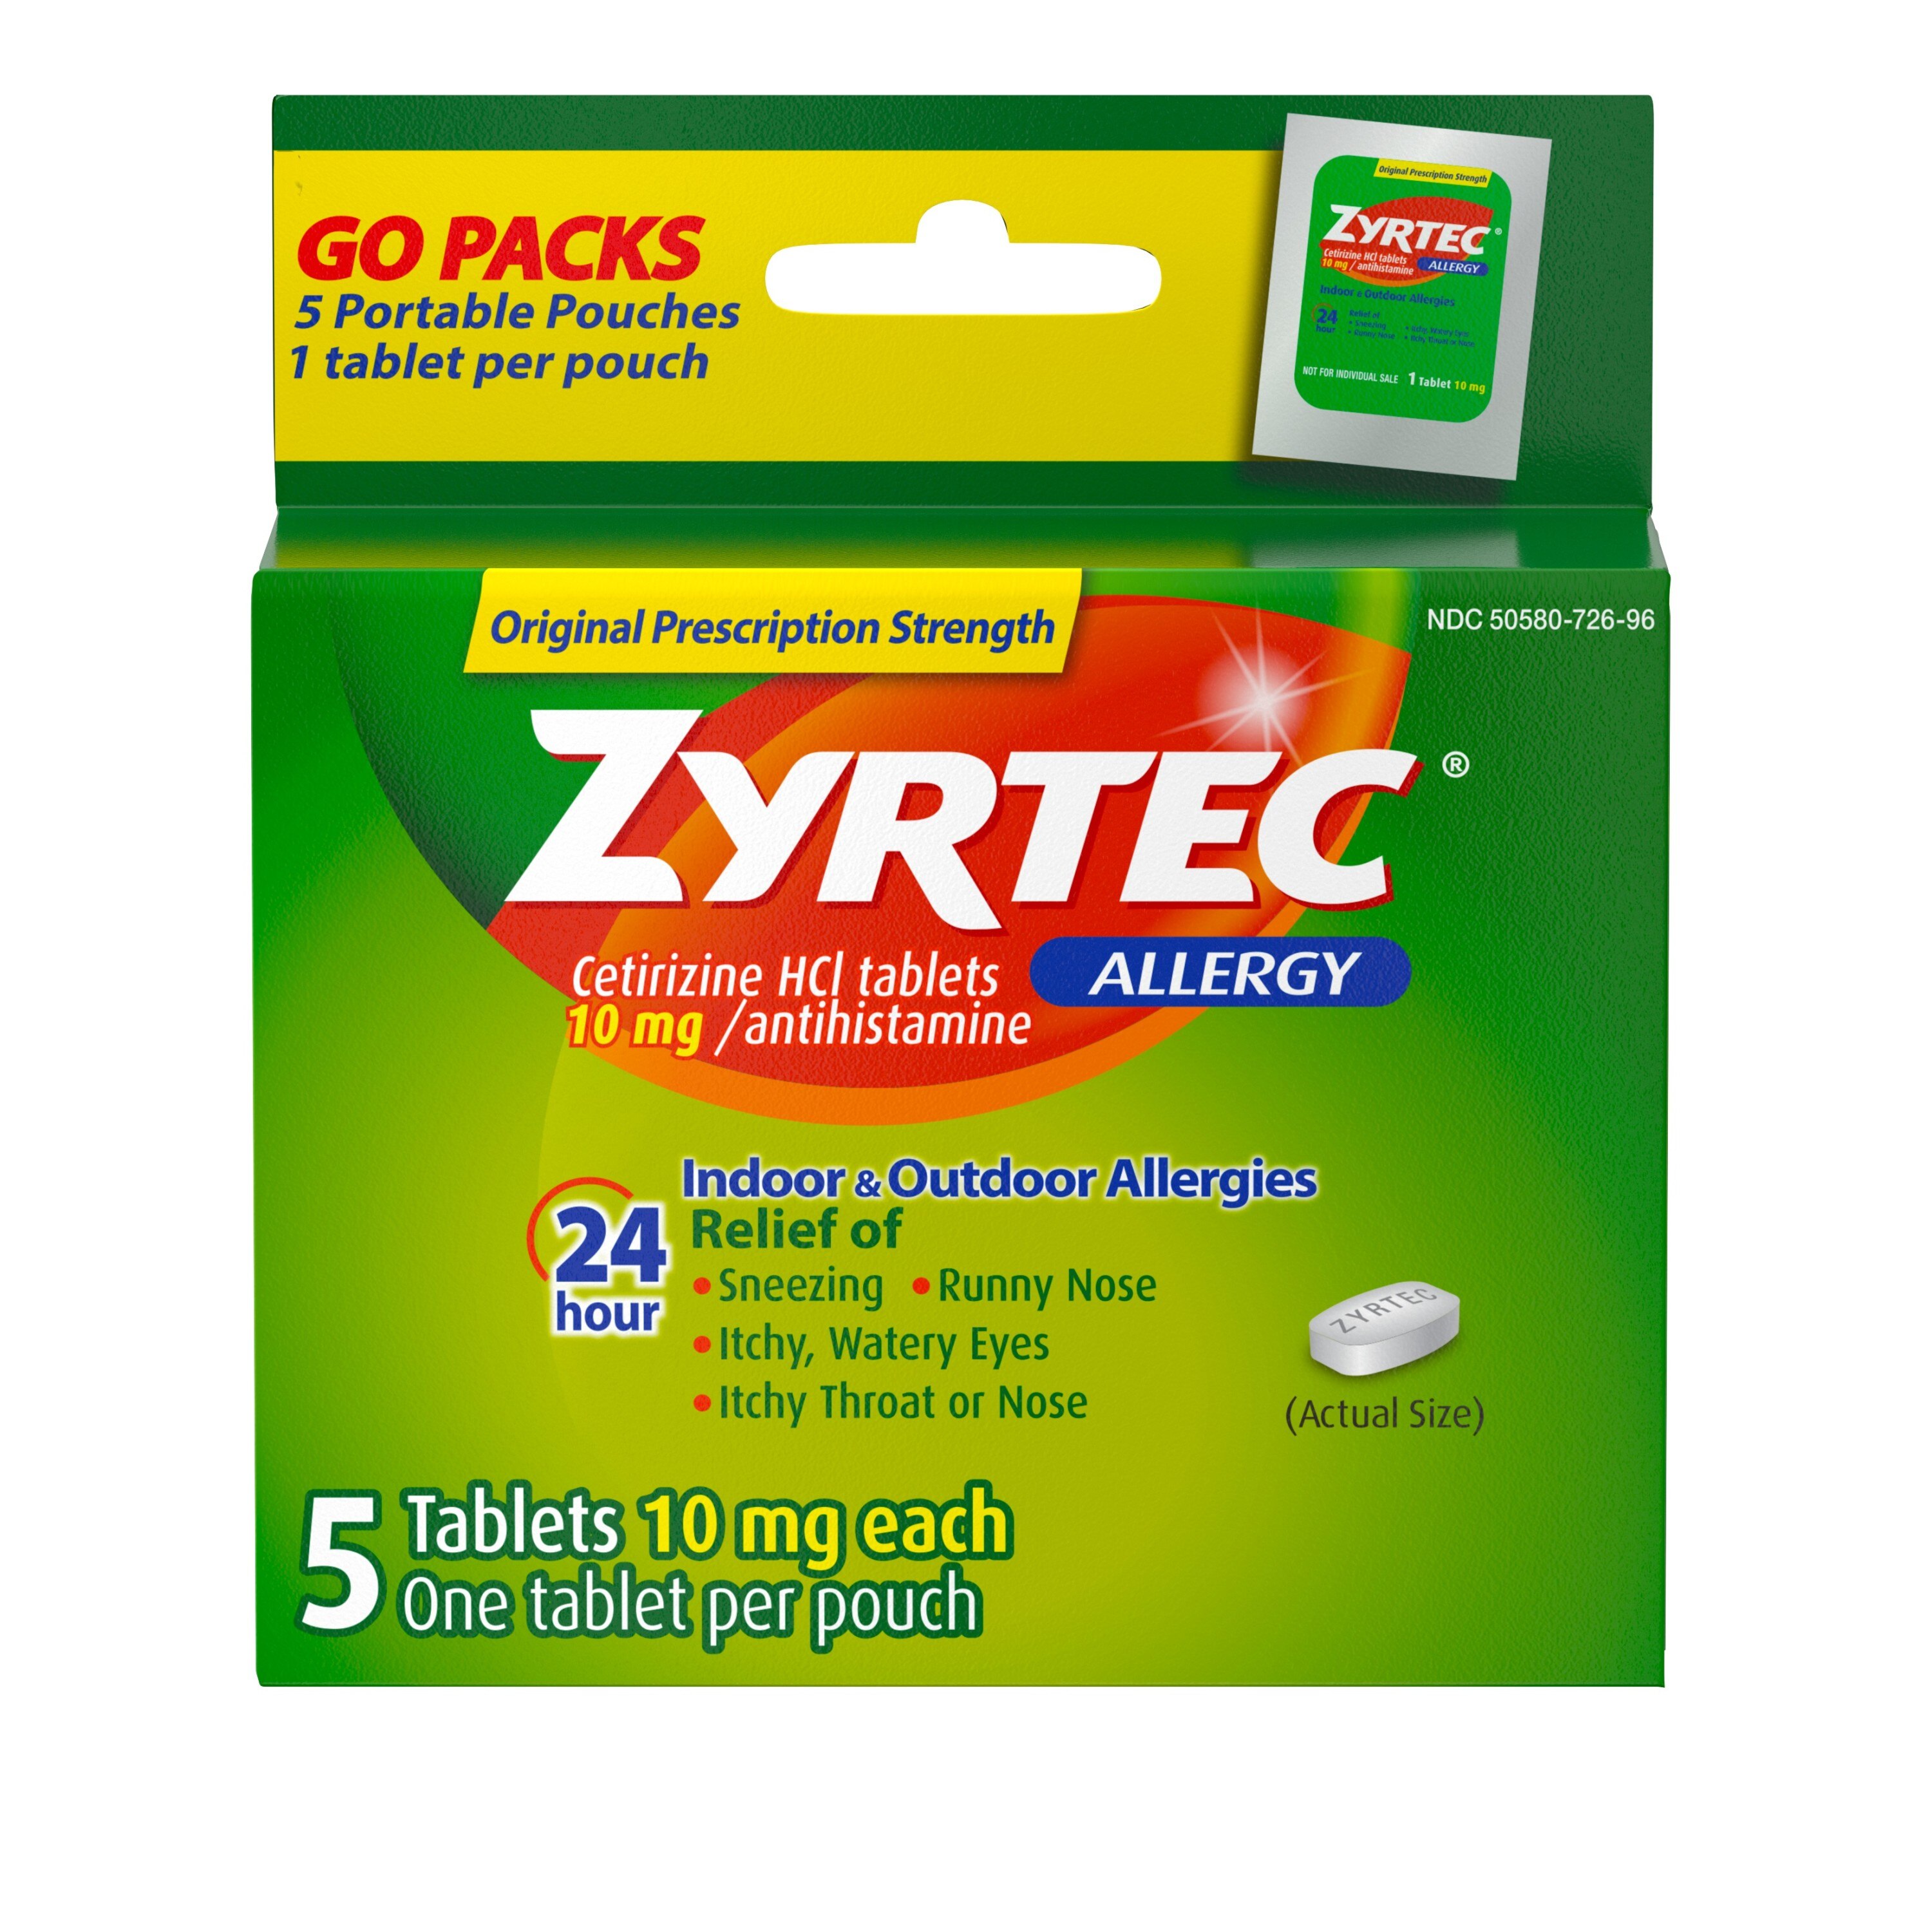  Zyrtec 24 Hour Allergy Relief Tablets with 10 mg Cetirizine HCl, 5 CT 